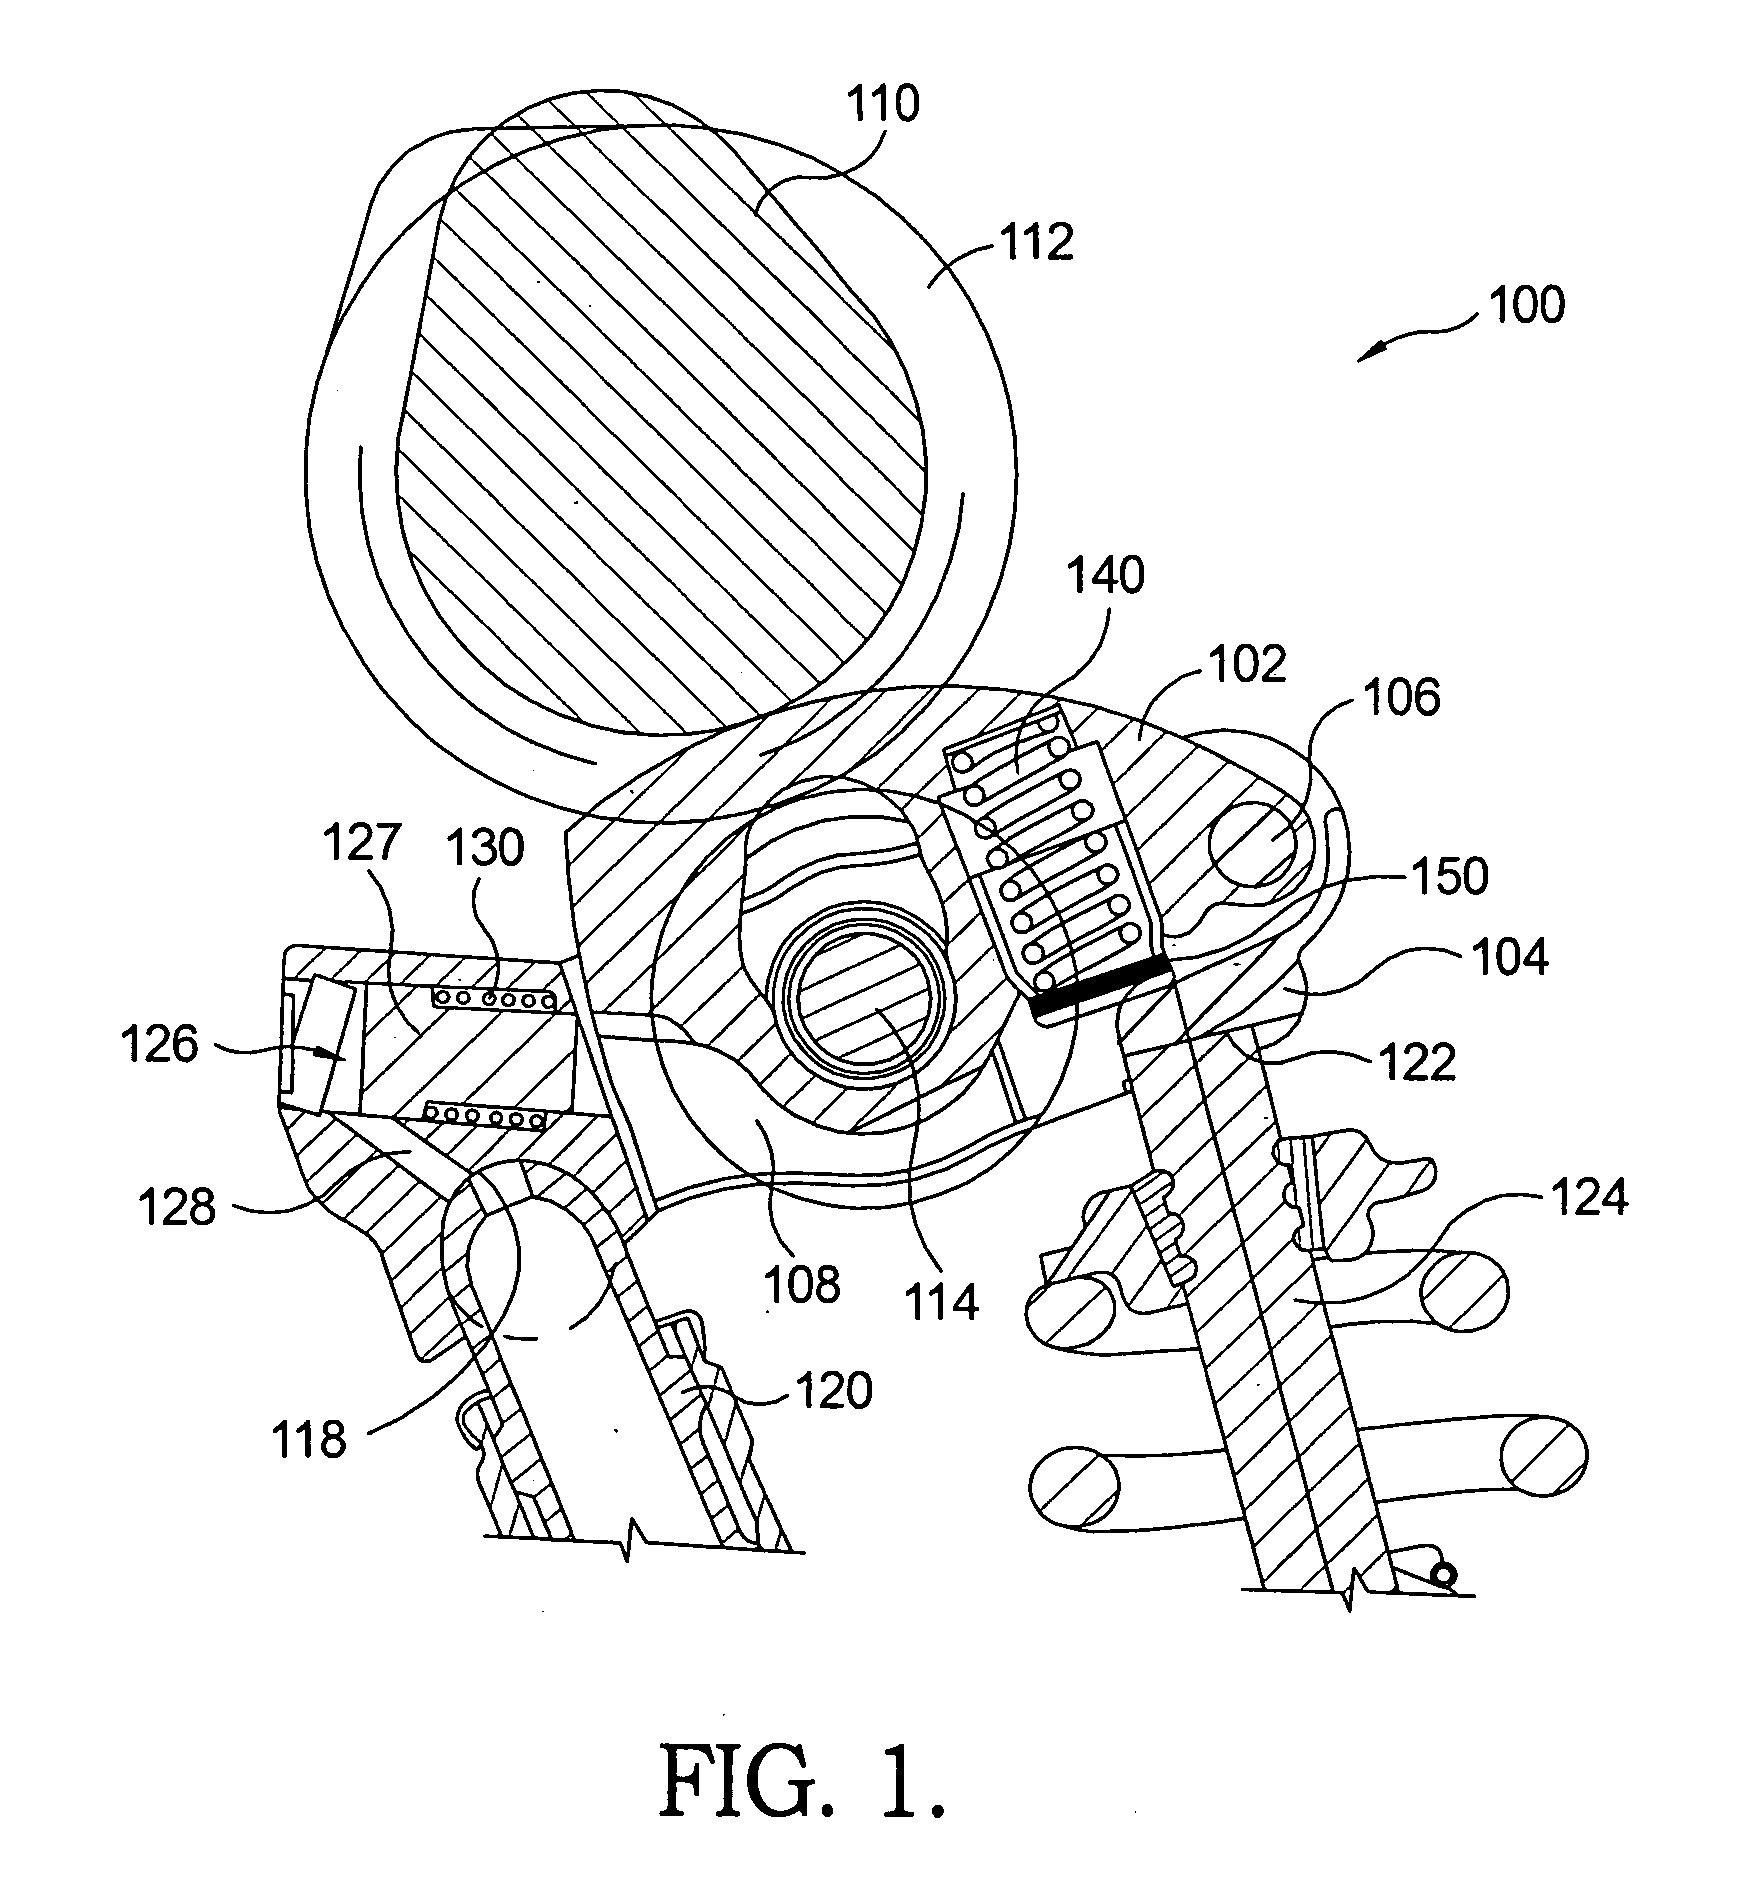 Diagnostics for two-mode variable valve activation devices